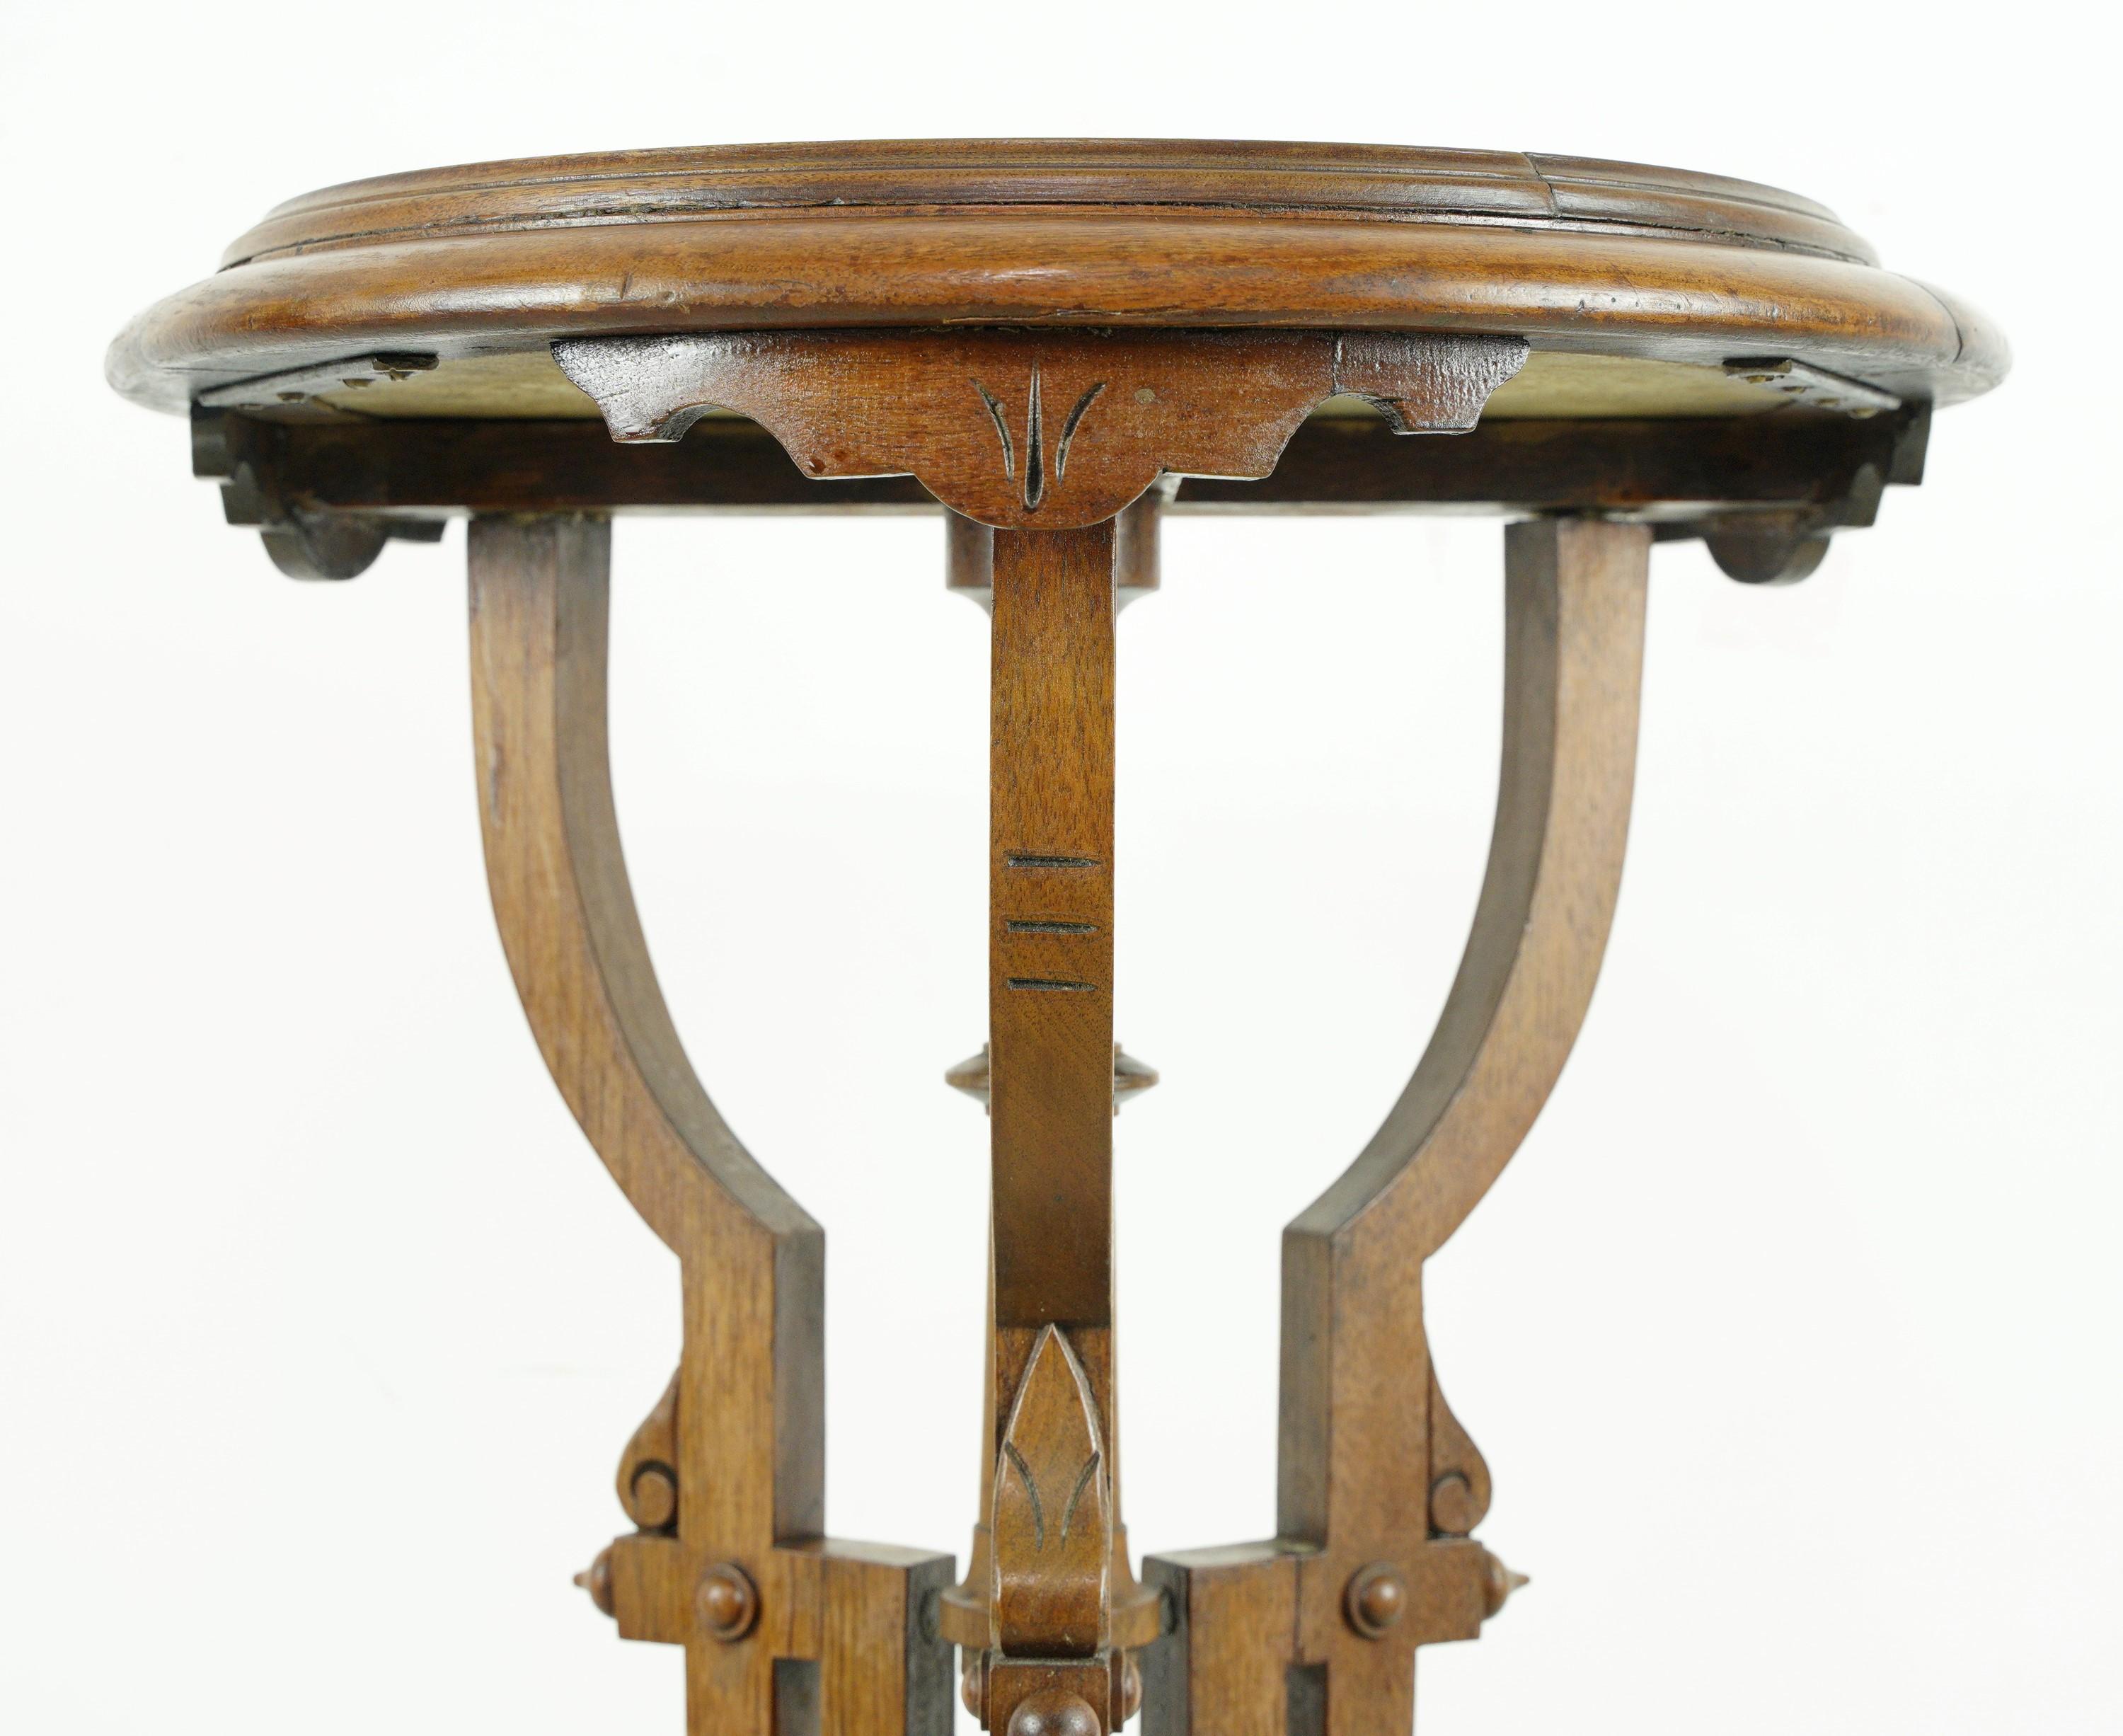 Early 20th century solid round oak side table or pendant featuring ornate Eastlake hand carvings and a matching round gray veined white marble top insert. Please note, one of the feet is slightly loose. Please note, this item is located in our